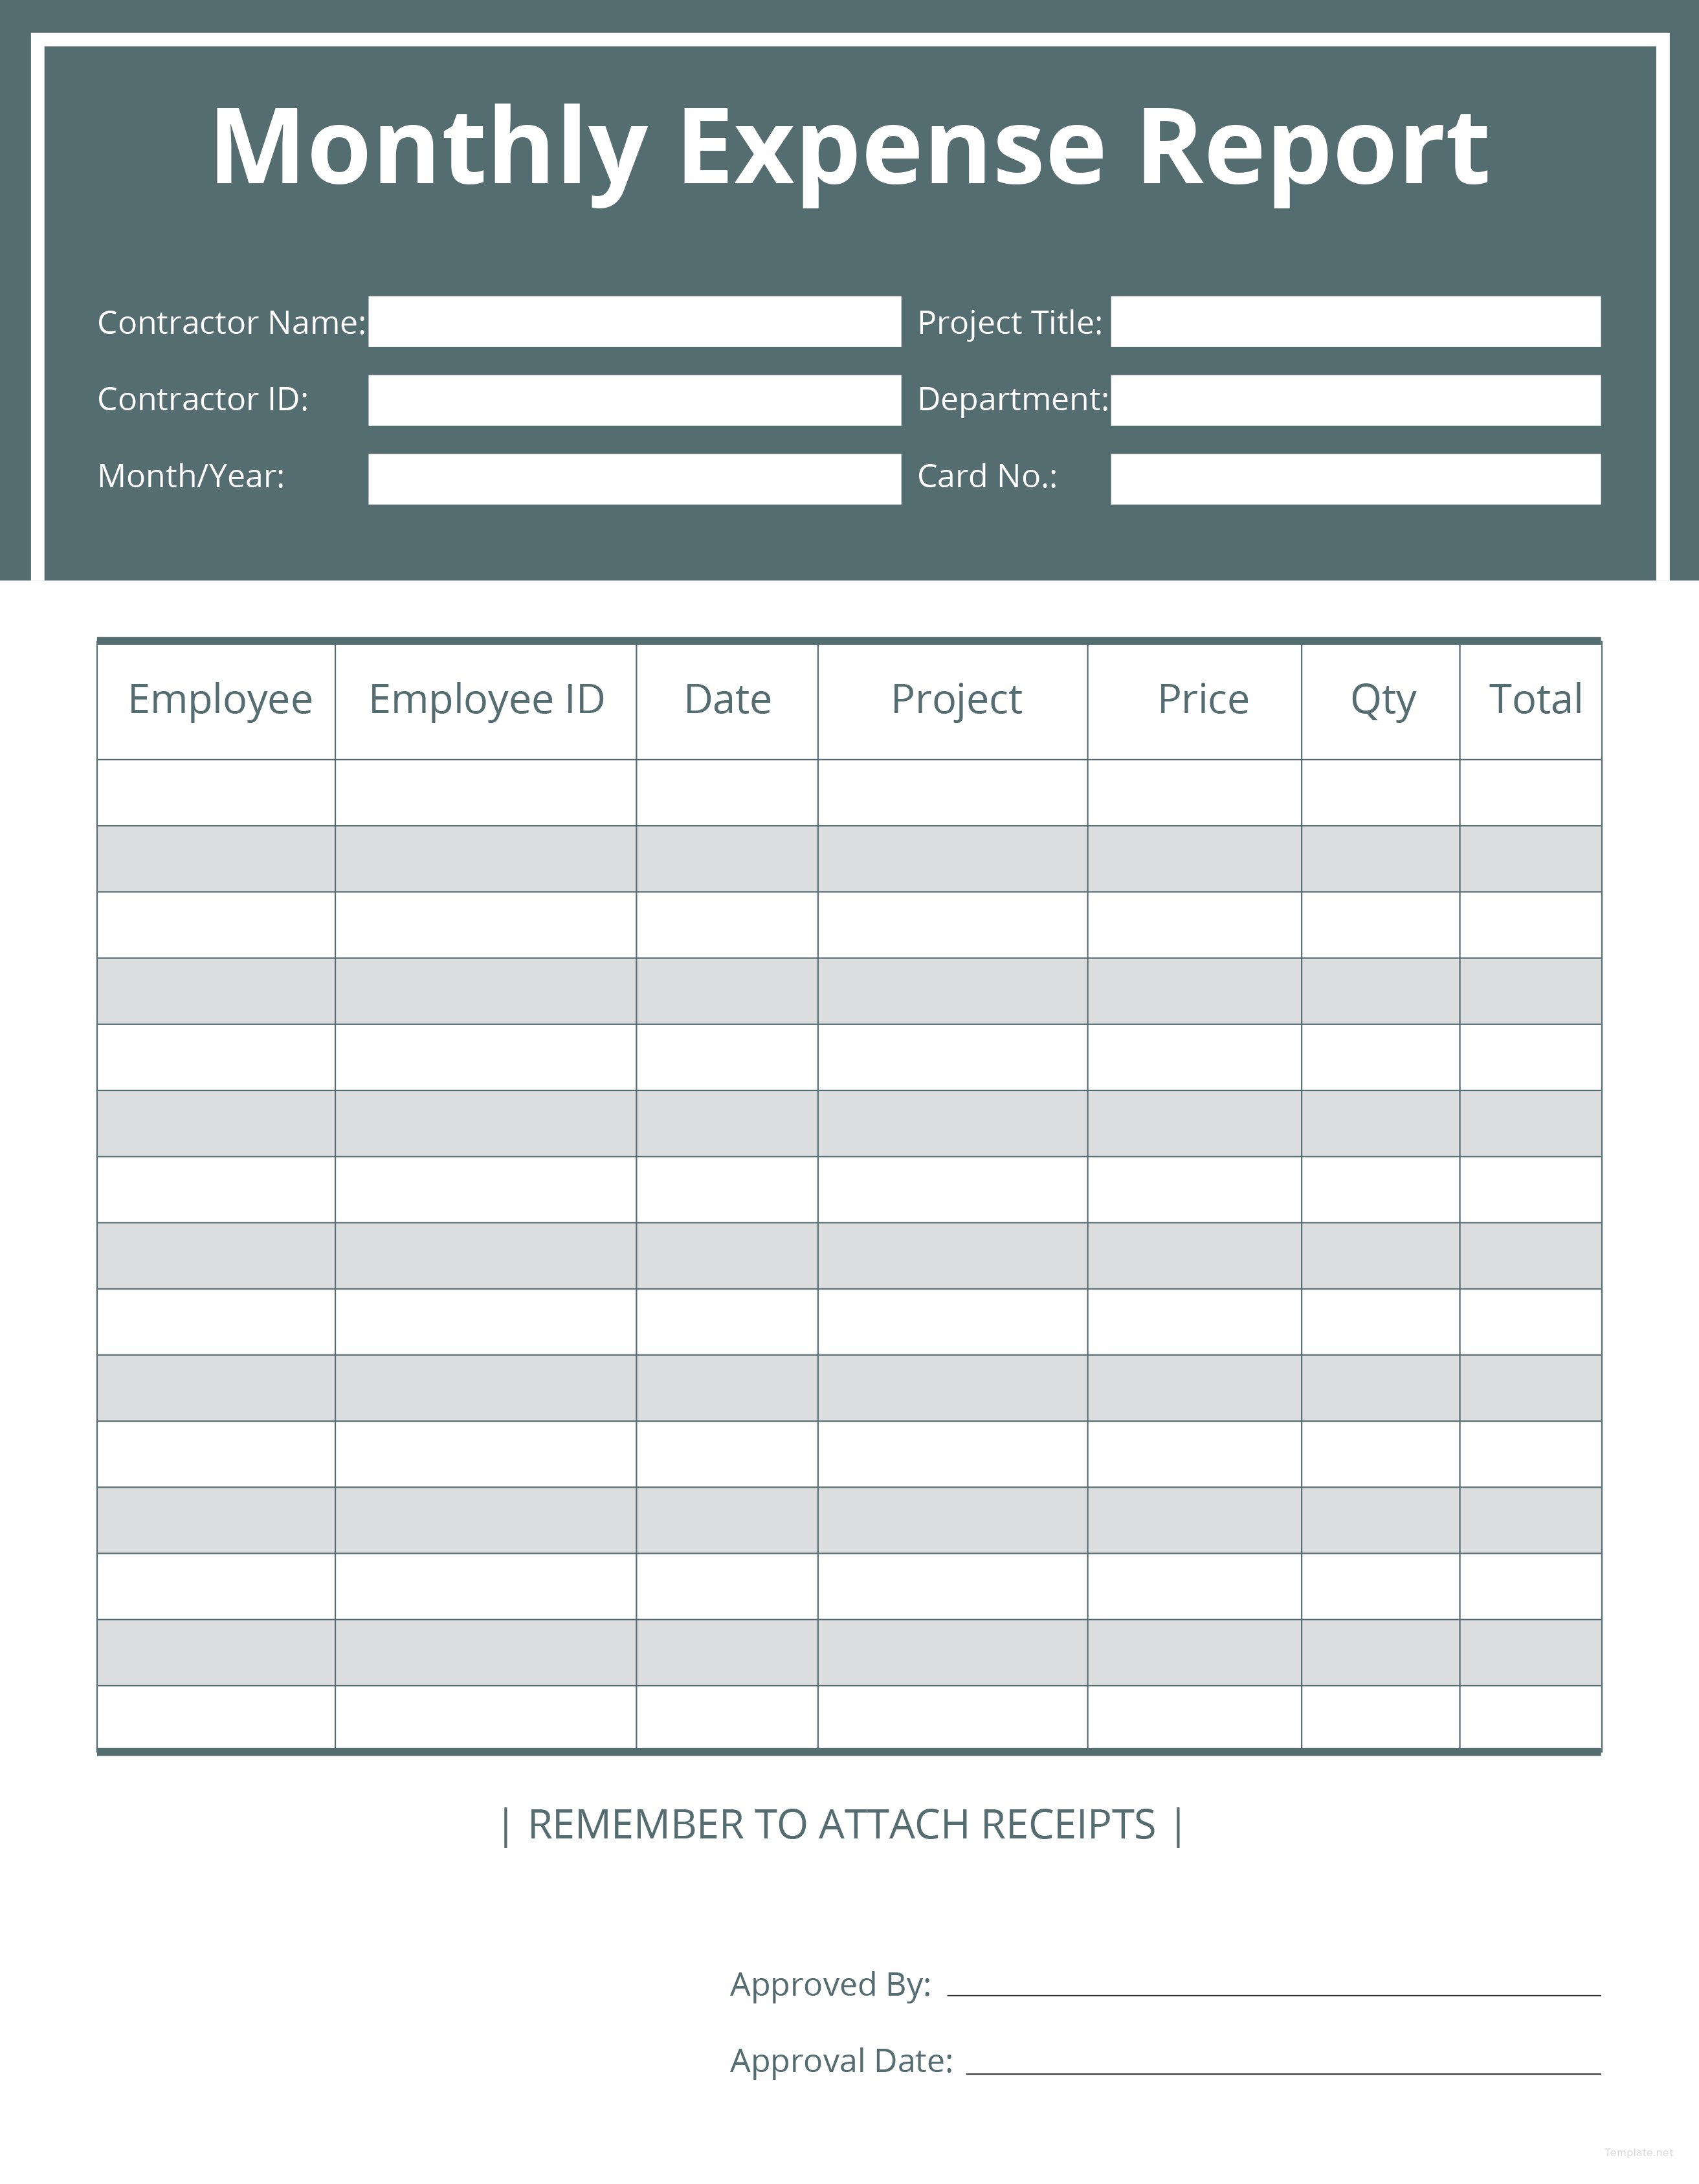 Free Contractor Expense Report Template in Microsoft Word, Microsoft